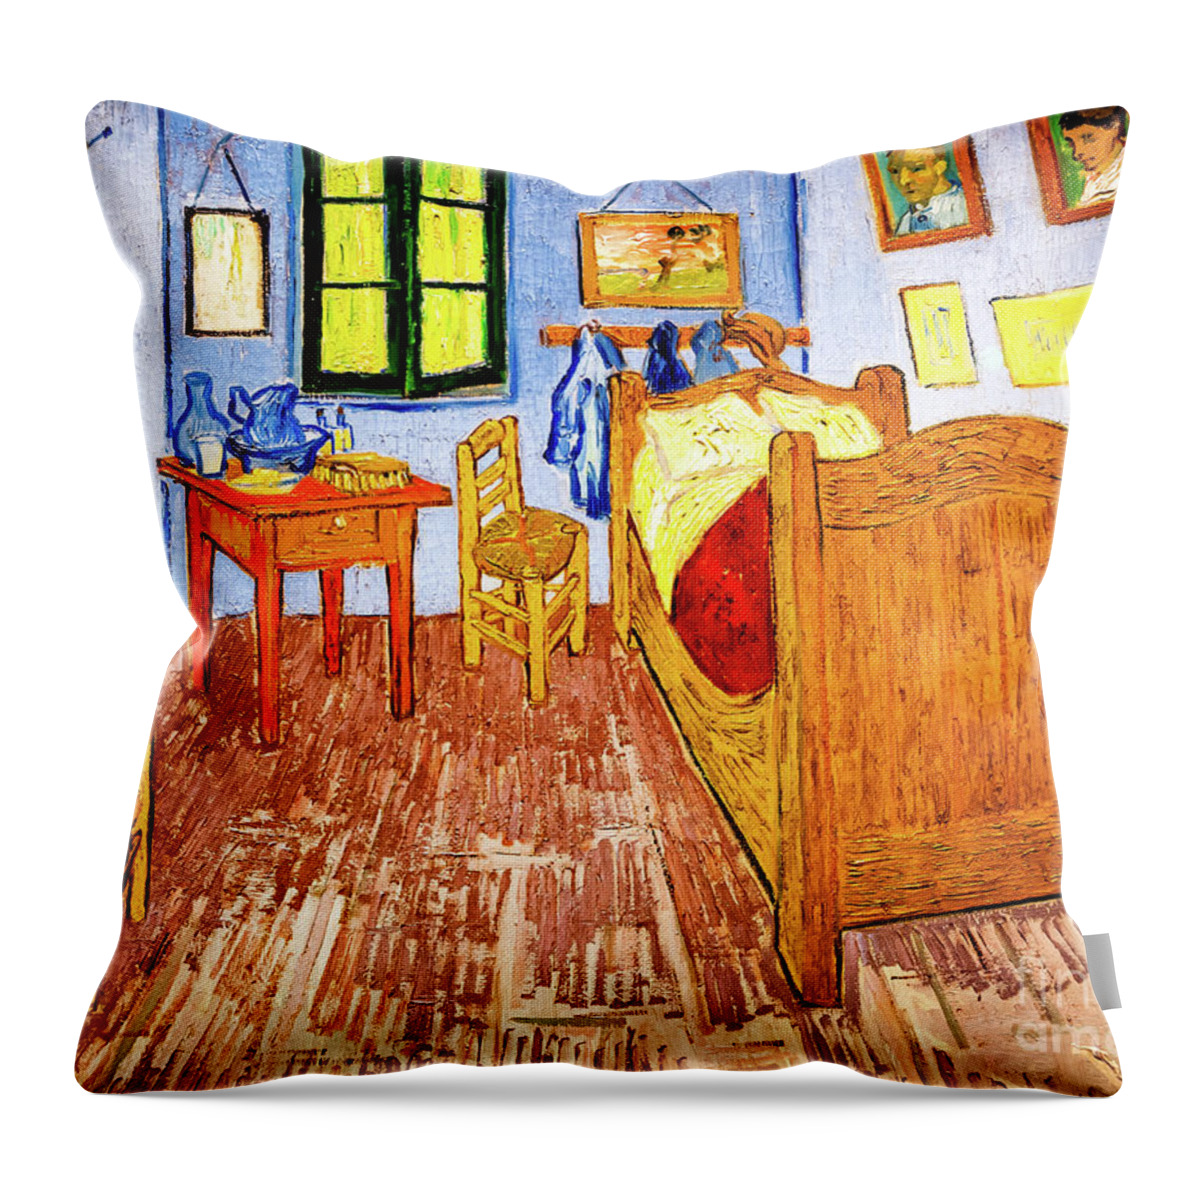 Vincent Throw Pillow featuring the painting Van Gogh's Bedroom by Vincent Van Gogh by Vincent Van Gogh